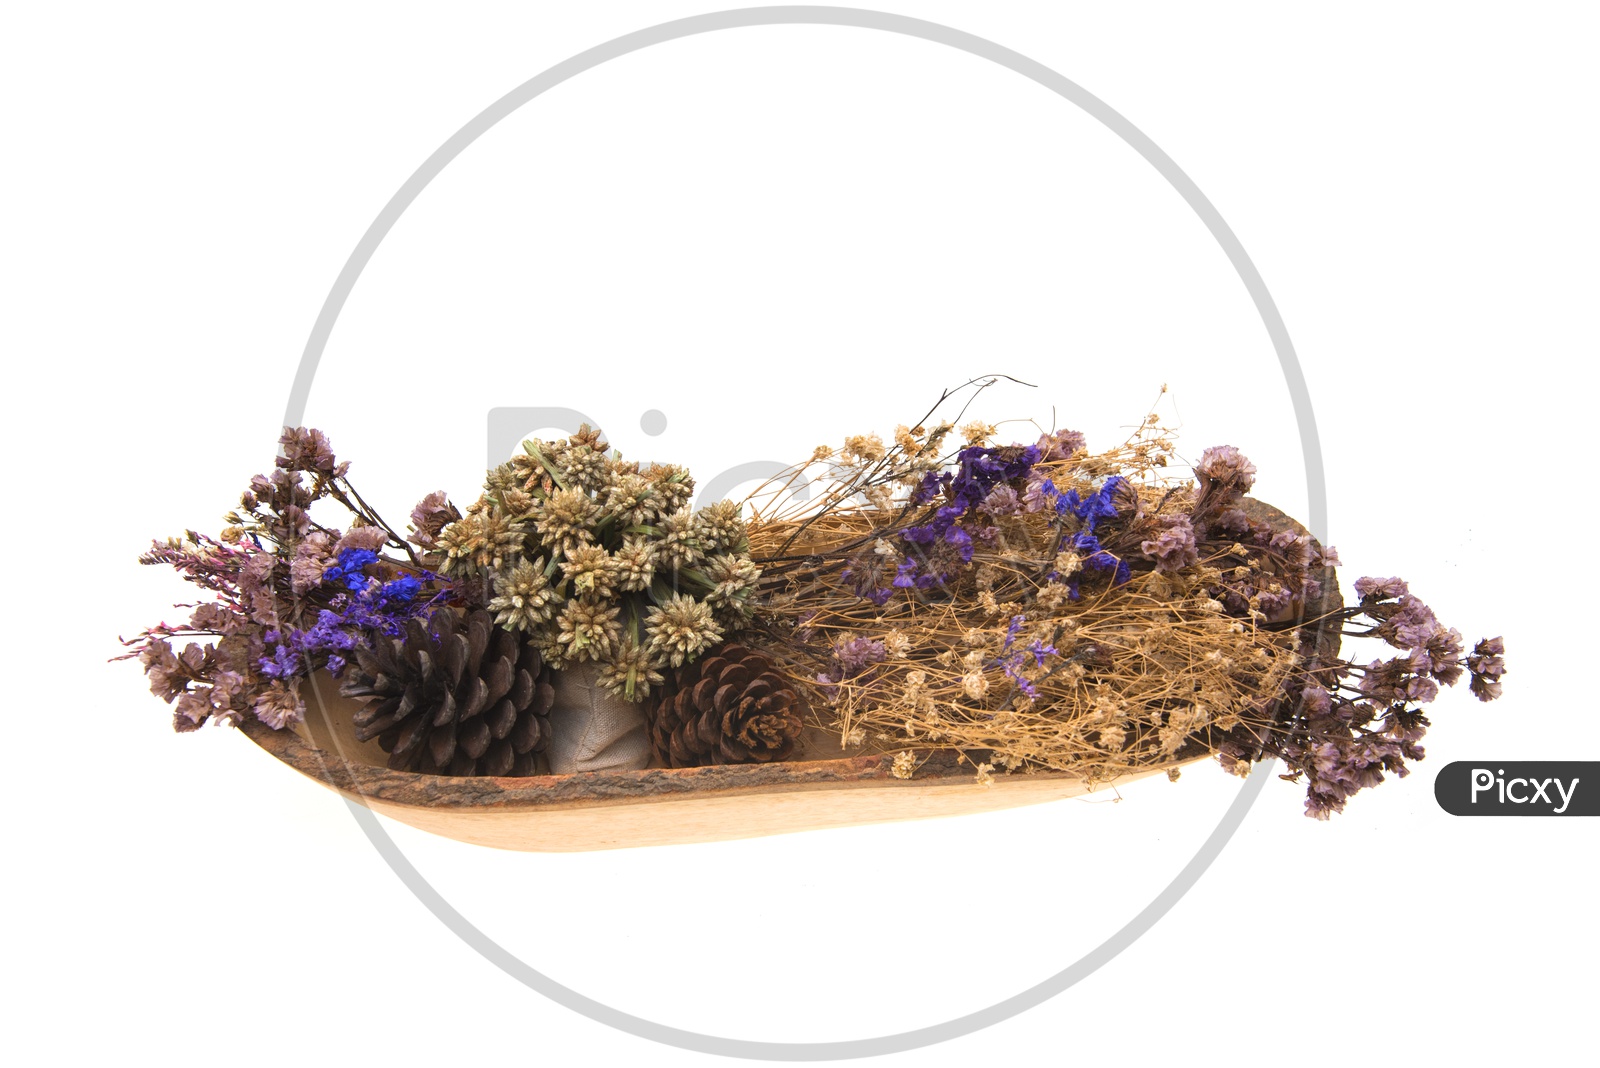 Dried vintage flowers are beautifully placed on white ground.